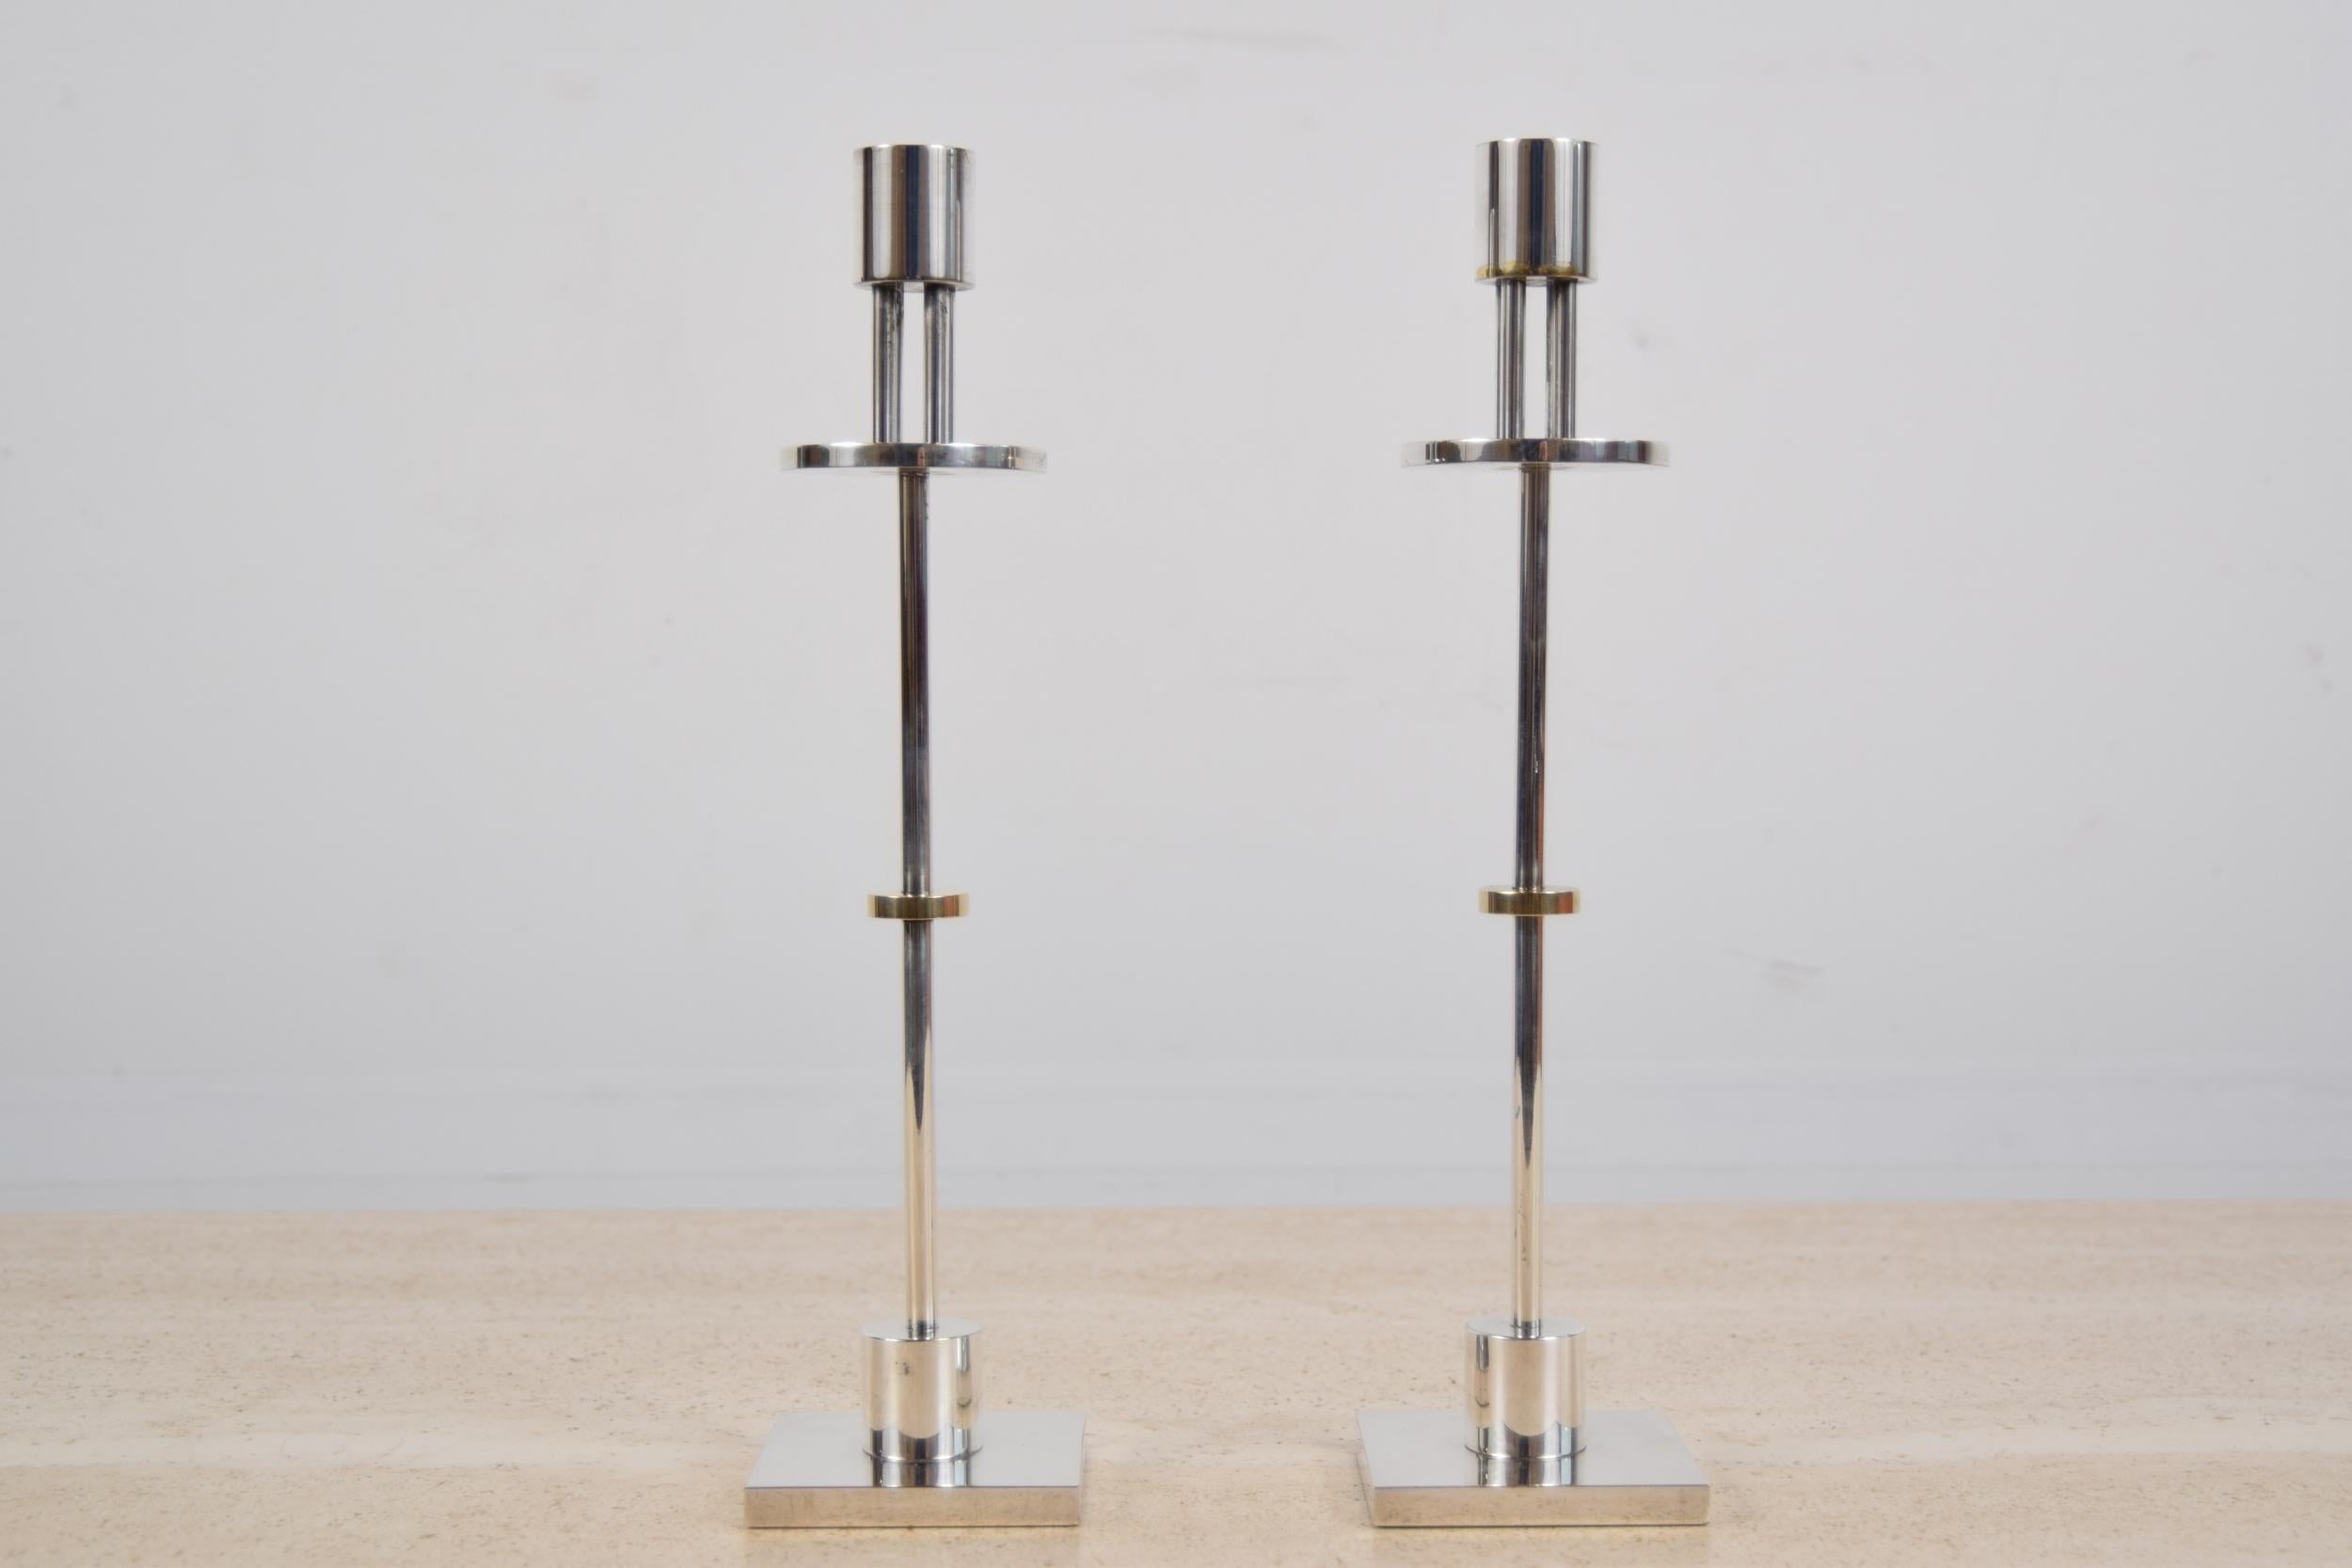 Pair of silver-plated and brass candlesticks designed by Ettore Sottsass for Swid Powell, circa 1988. Candlesticks measure 13